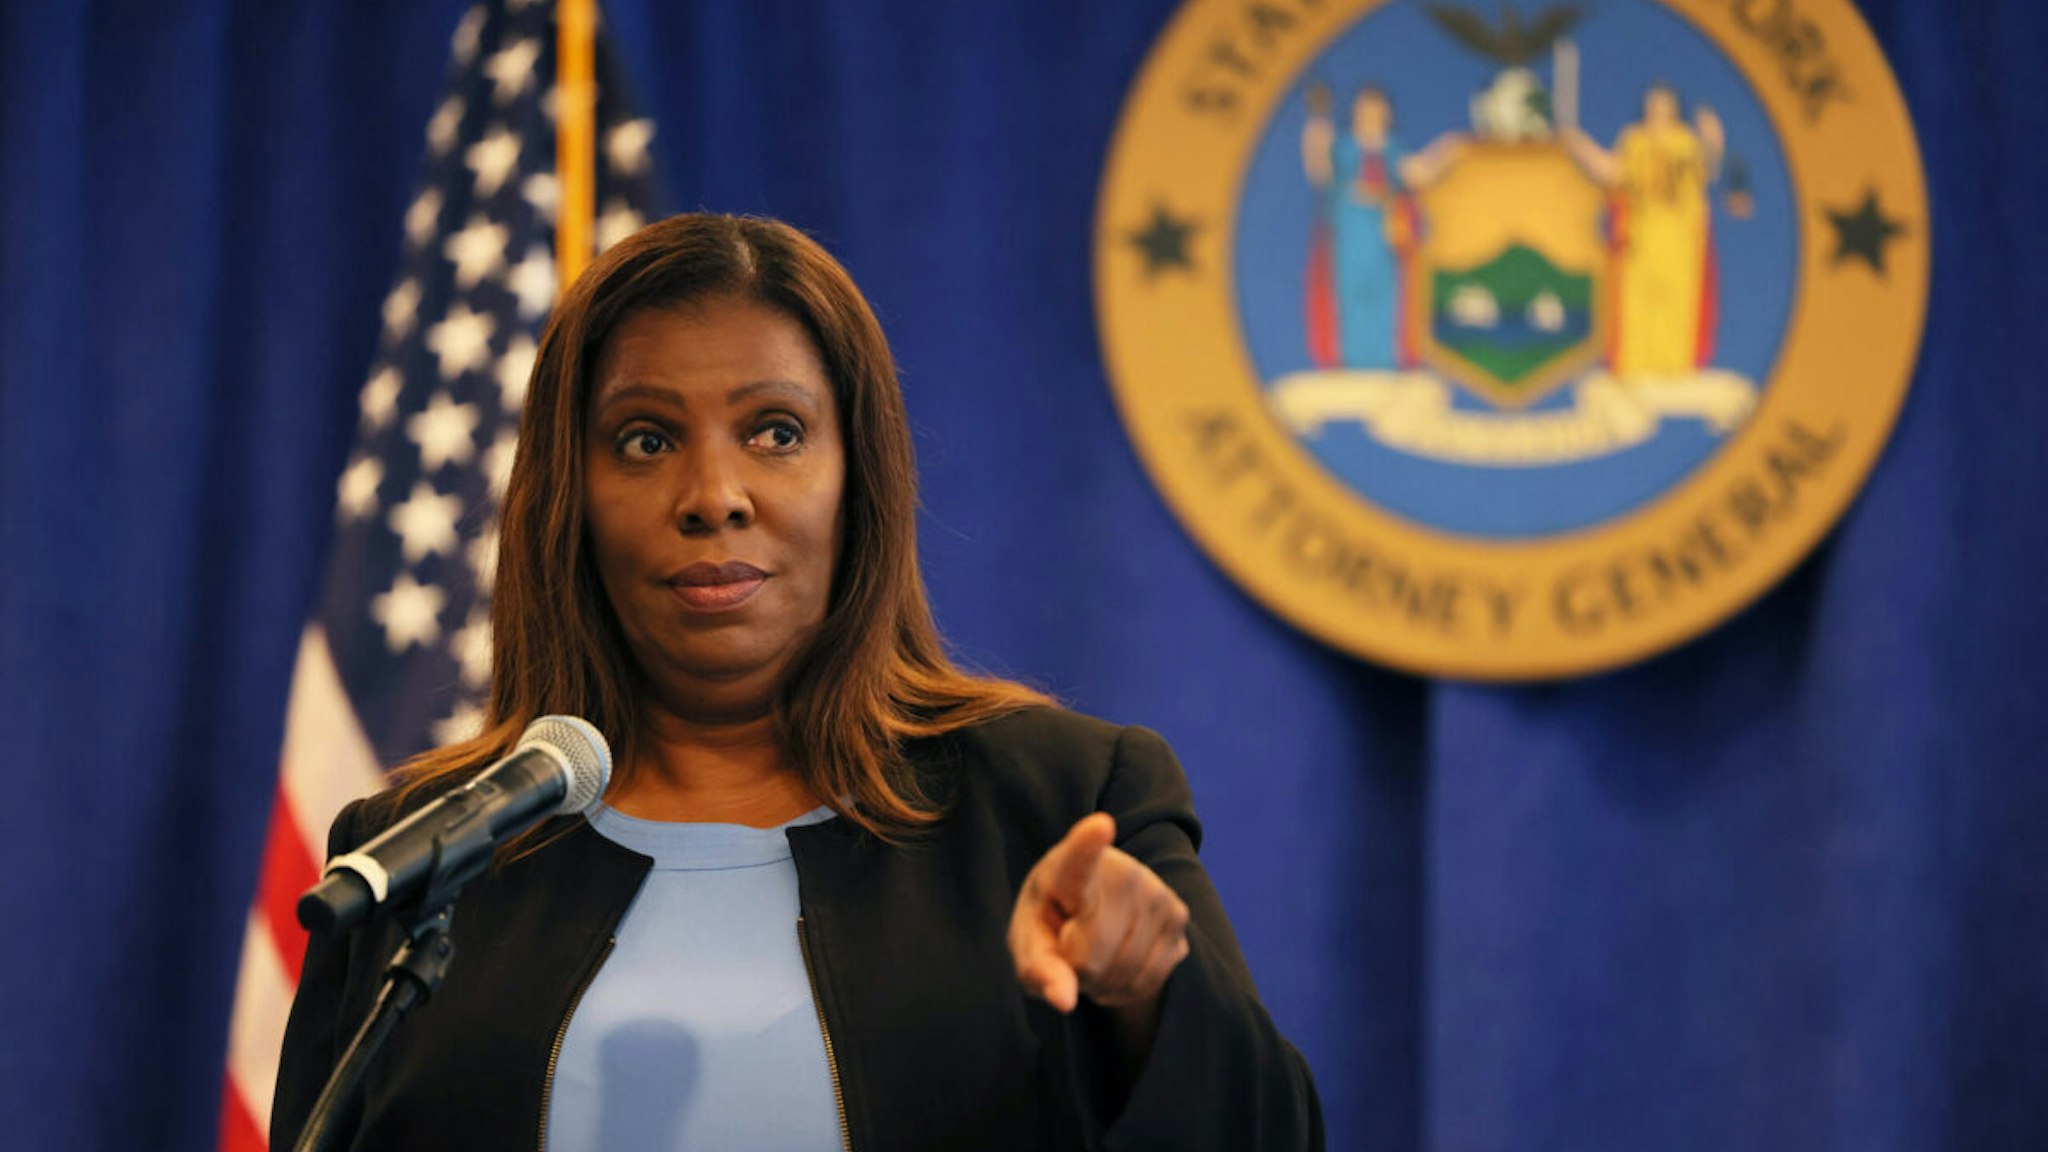 New York Attorney General Letitia James speaks during a press conference at the office of the Attorney General on July 13, 2022 in New York City.